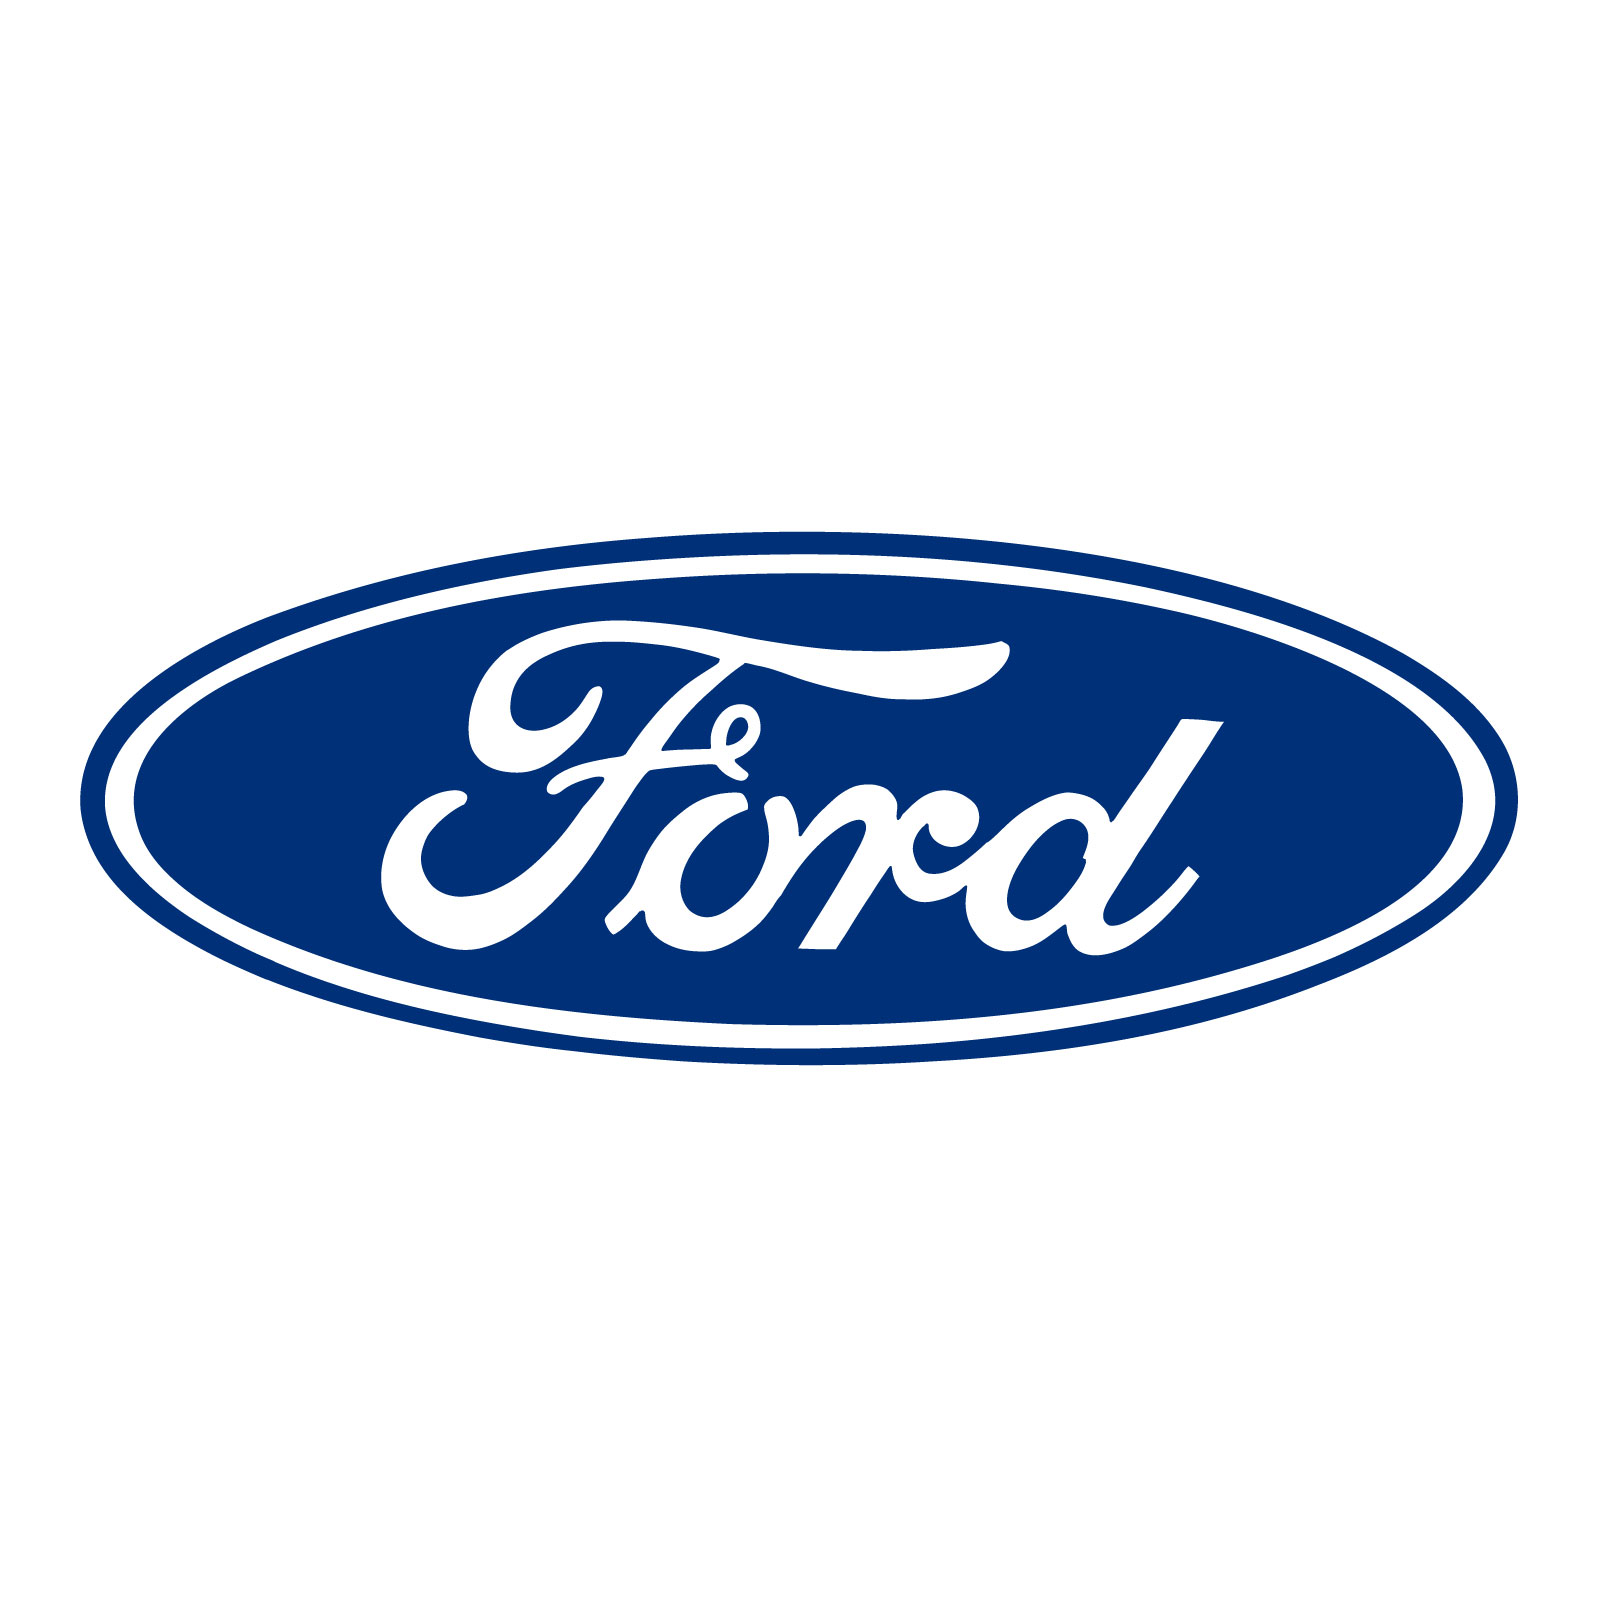 How to draw the Ford logo - final step